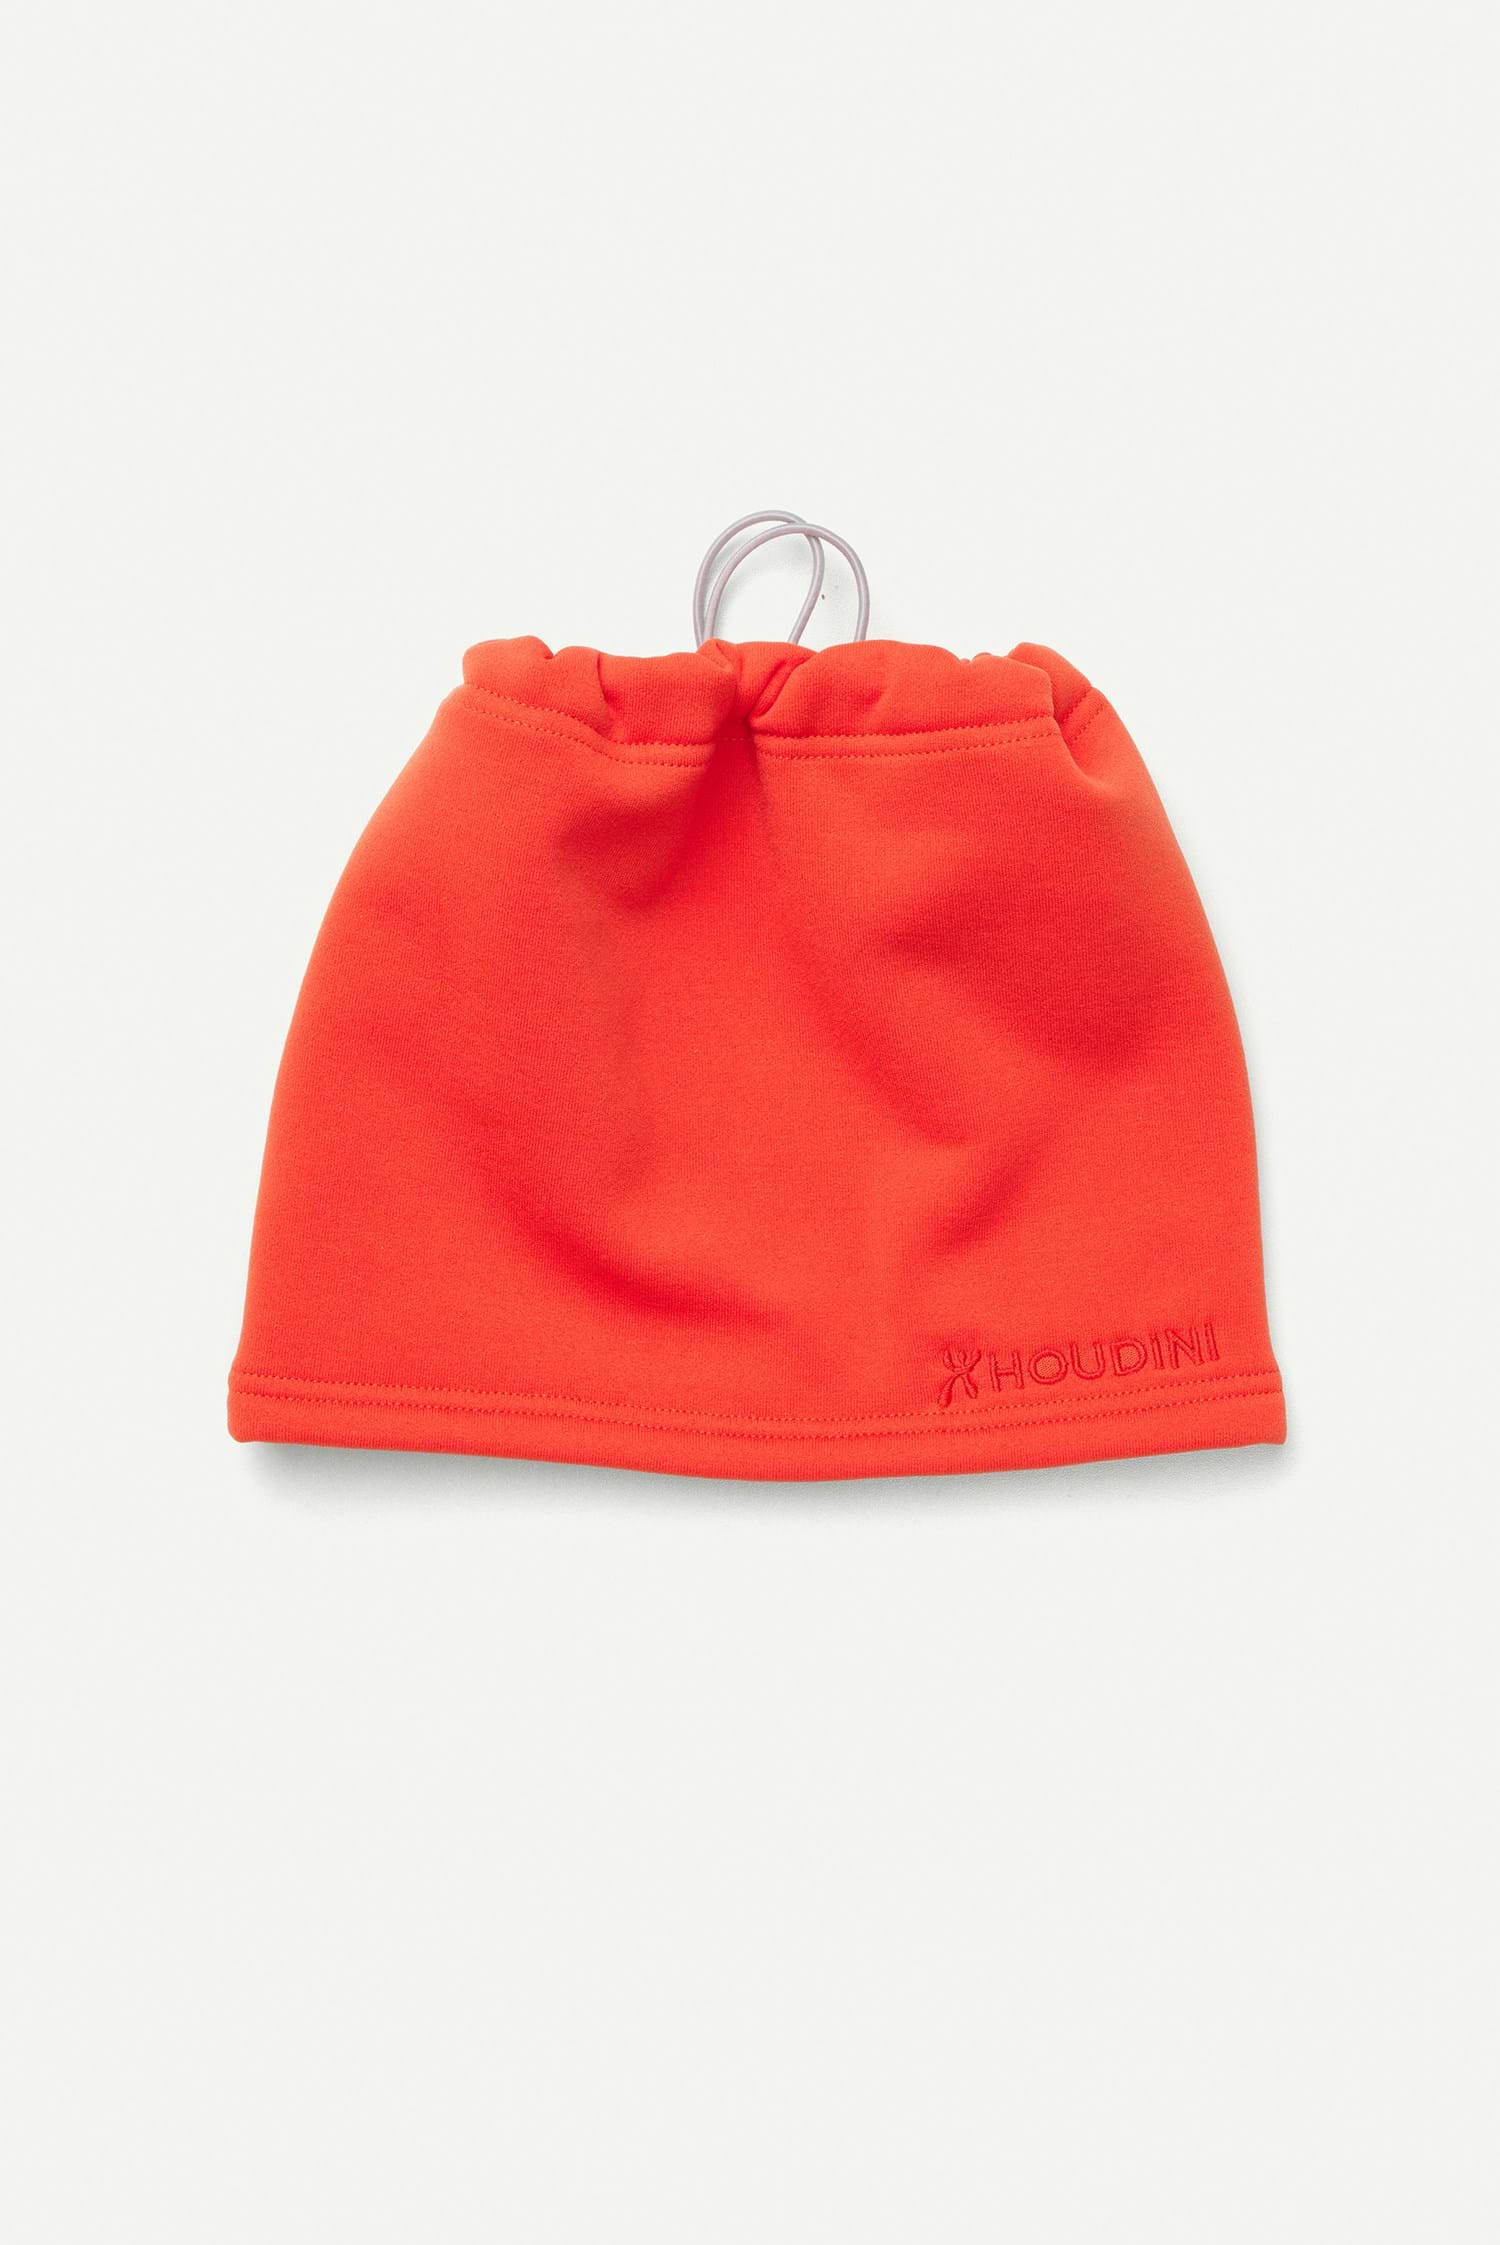 Houdini Power Hat, More Than Red, L